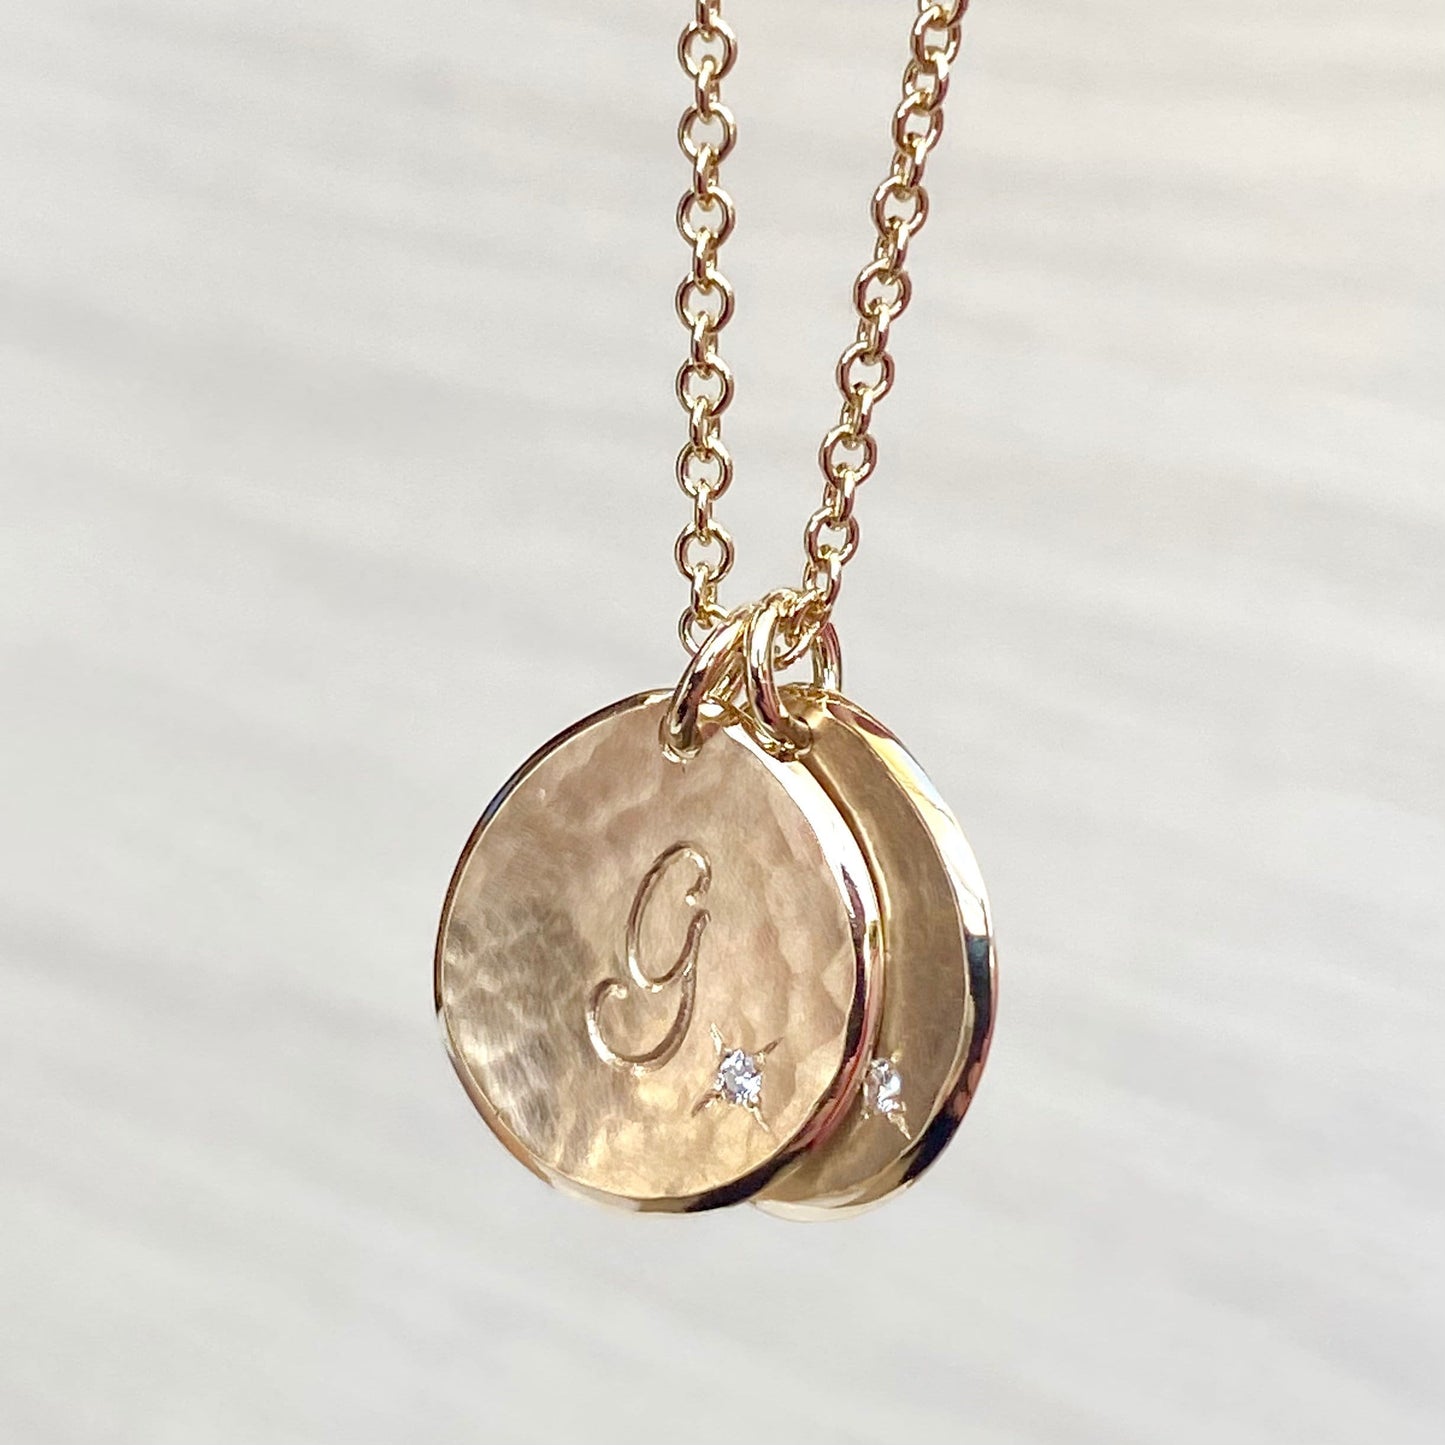 Handmade to order - 9ct solid yellow gold personalised 16mm diamond petal charm pendants on a 1.8mm wide trace chain